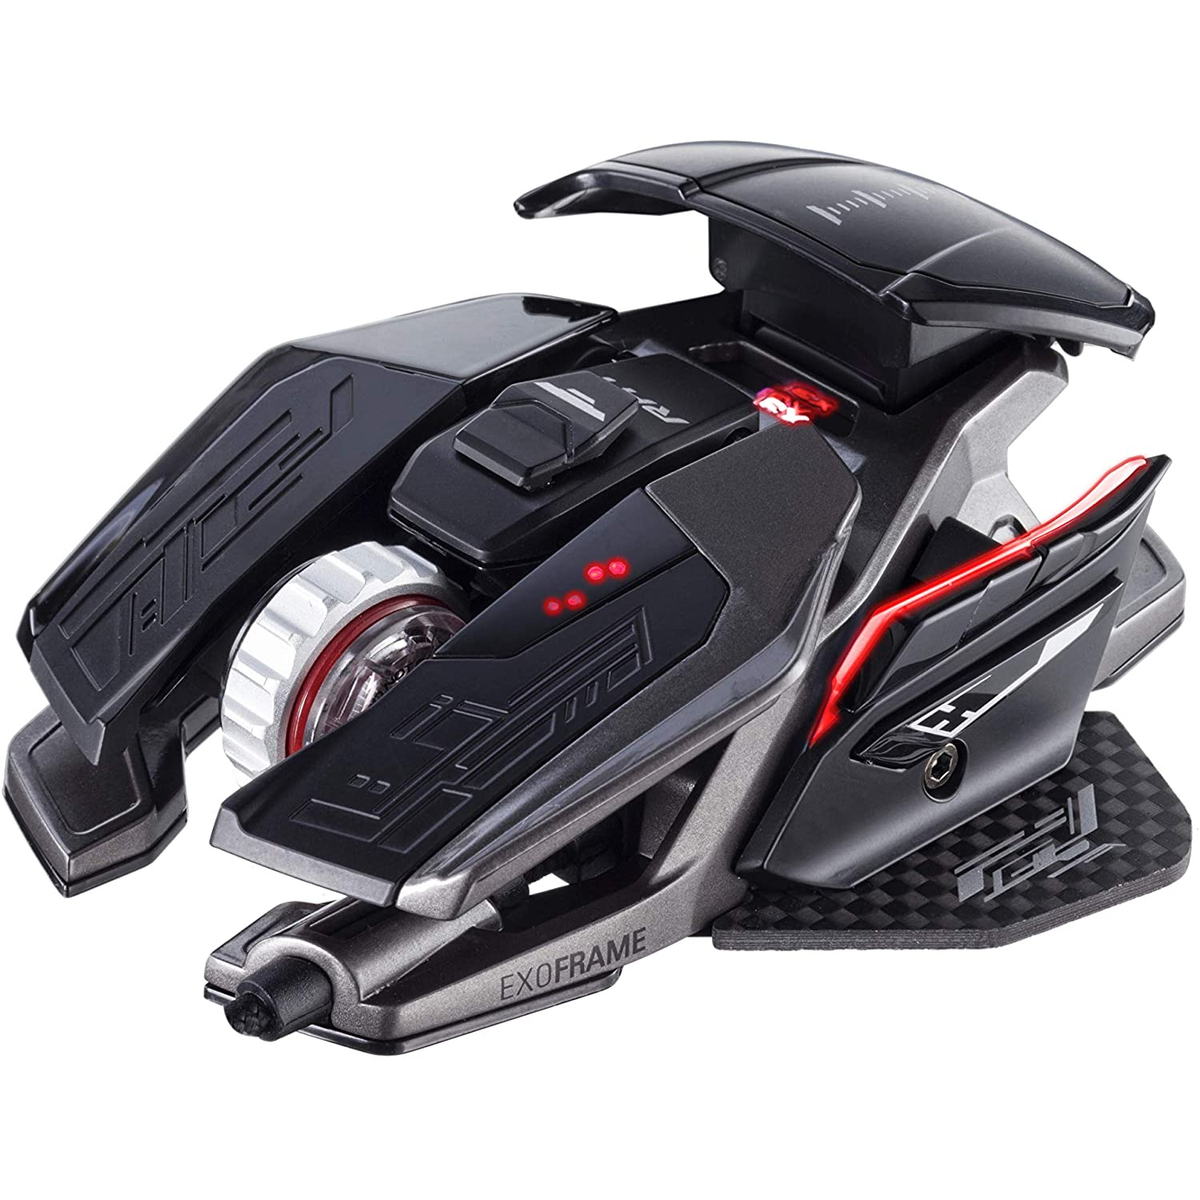 MAD CATZ MR05DCINBL001-0 X3 Maus, black BL GAM. PERFORMANCE HIGH MOUSE Gaming